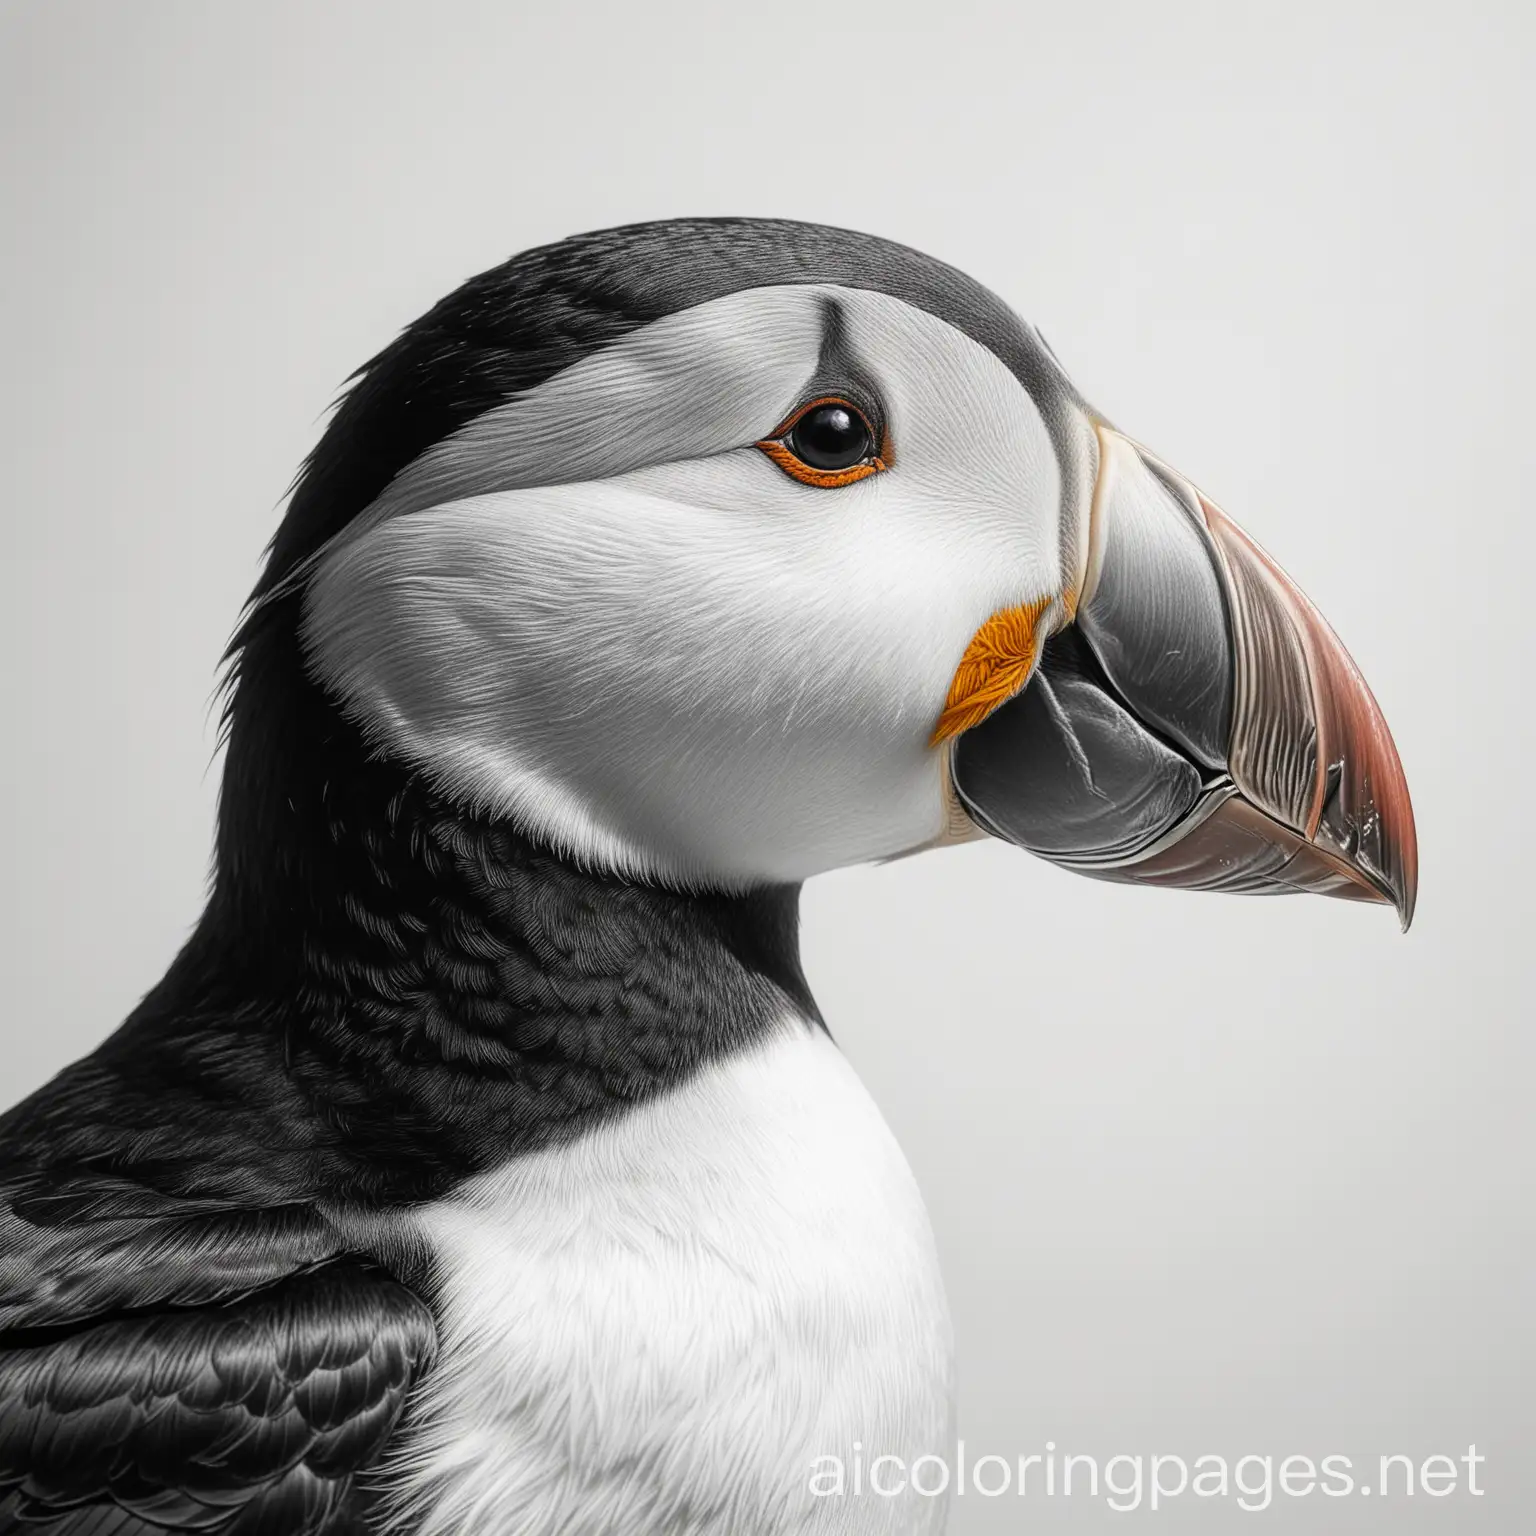 Puffin-Face-Profile-Coloring-Page-Elegant-Line-Art-on-White-Background